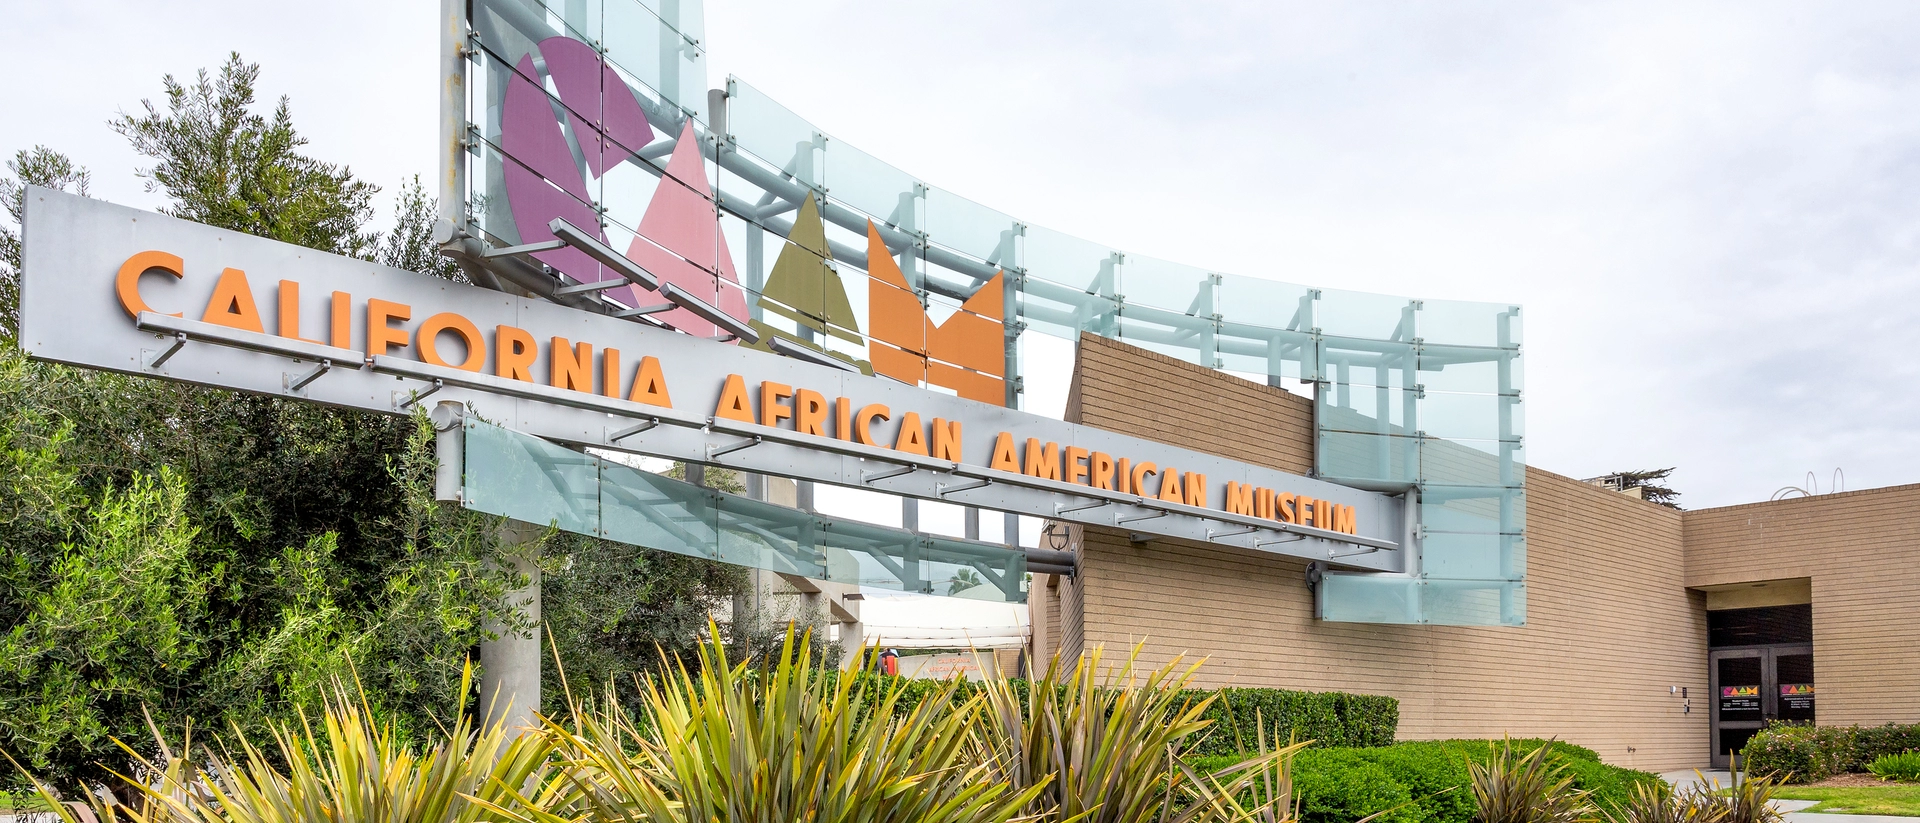 The exterior of the California African American Museum in Exhibition Park